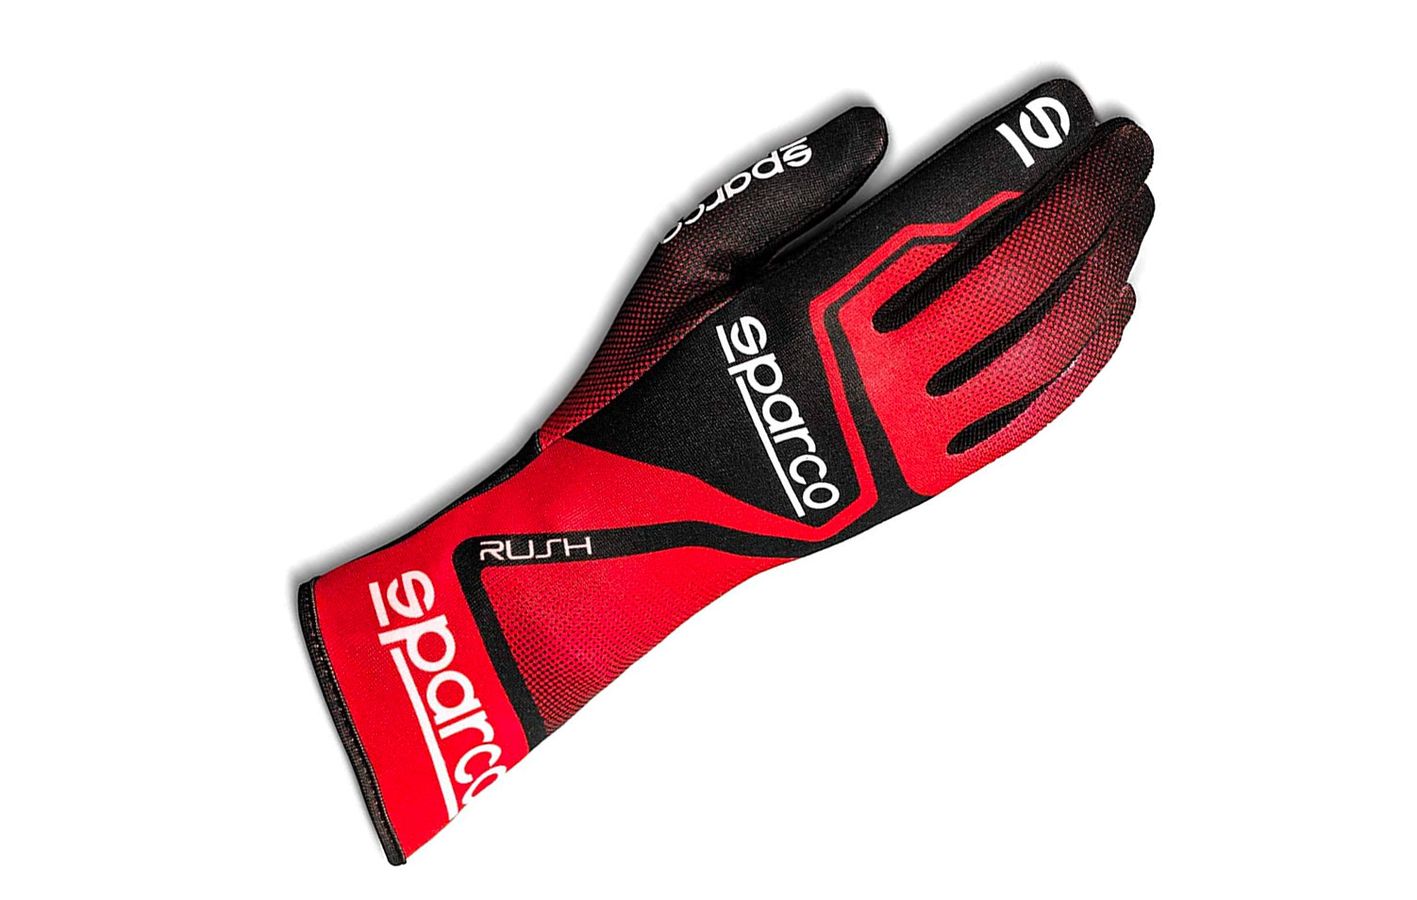 Sparco Rush product image of a red and black glove featuring white branding.